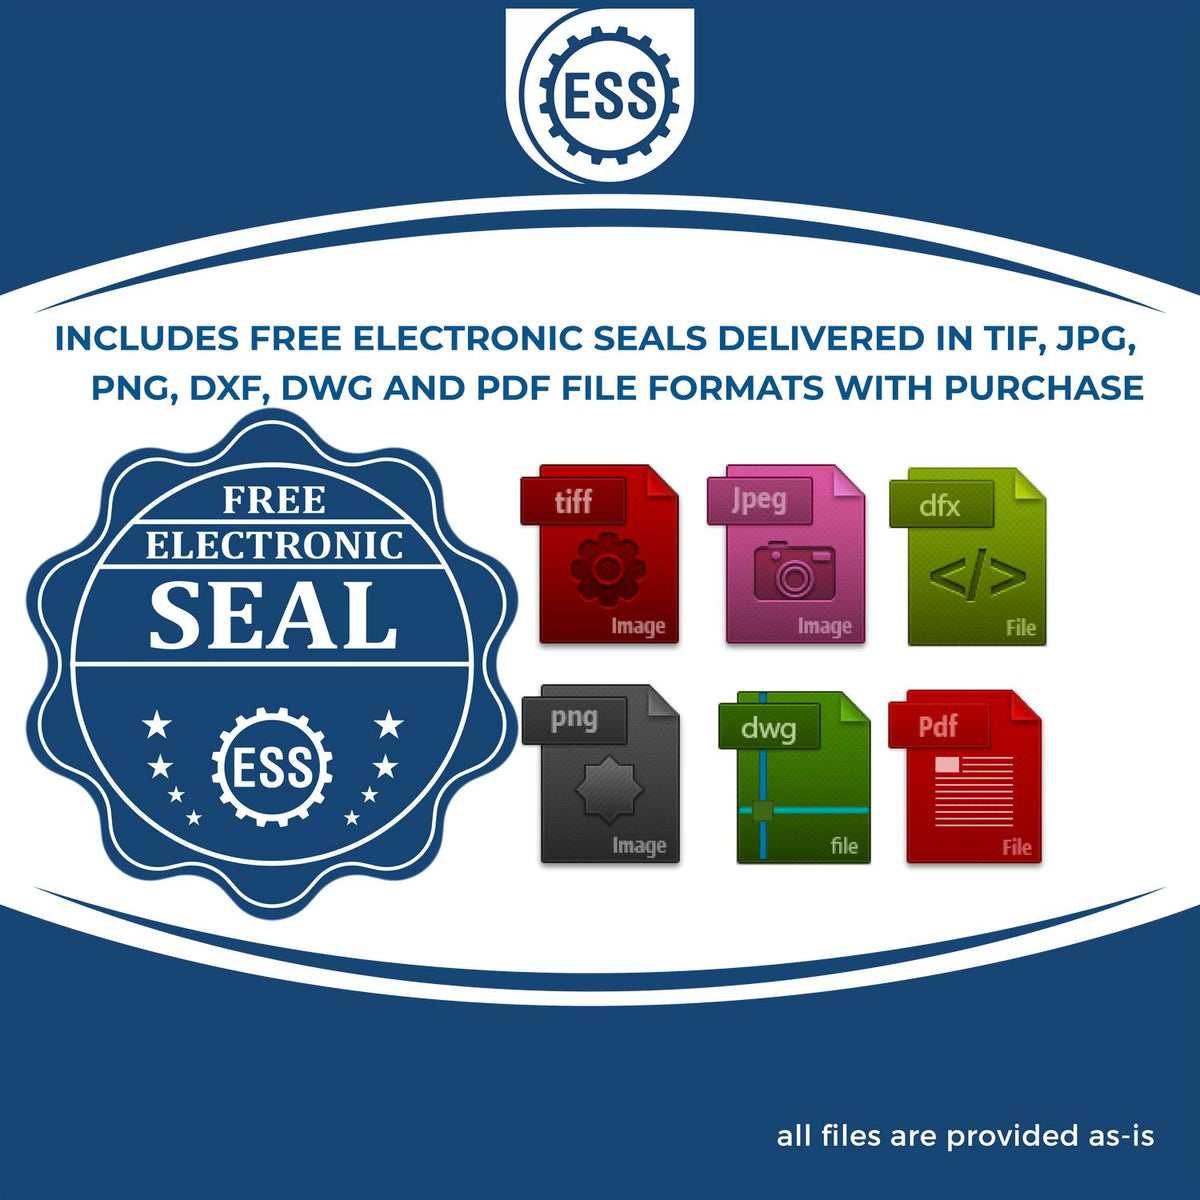 An infographic for the free electronic seal for the Long Reach Minnesota PE Seal illustrating the different file type icons such as DXF, DWG, TIF, JPG and PNG.